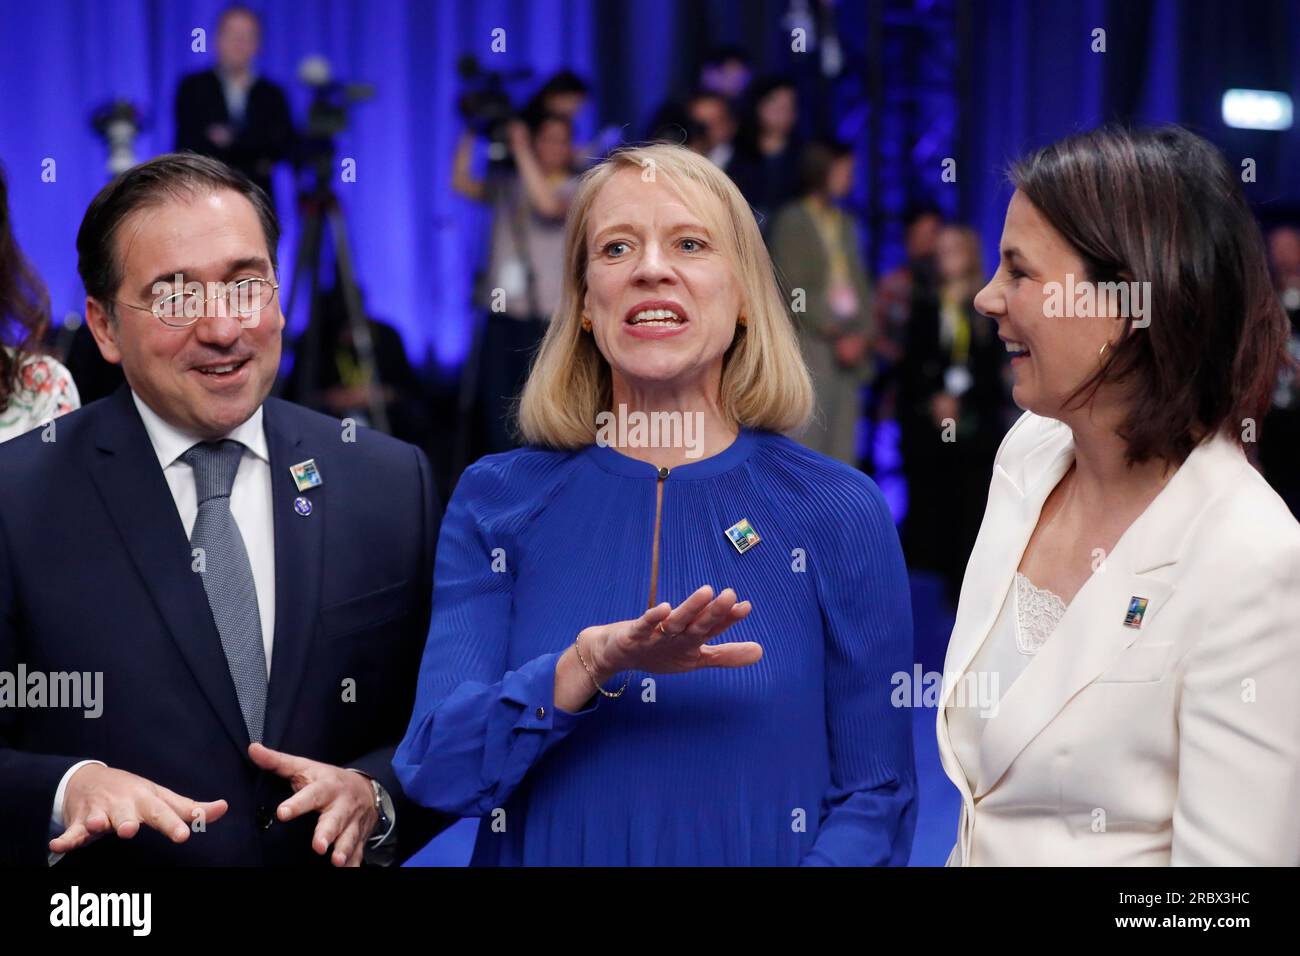 Norway's Foreign Minister Anniken Huitfeldt, center, speaks with Spain's Foreign Minister Jose Manuel Albares Bueno, left, and Germany's Foreign Minister Annalena Baerbock during a round table meeting of the North Atlantic Council during a NATO summit in Vilnius, Lithuania, Tuesday, July 11, 2023. NATO's summit began Tuesday with fresh momentum after Turkey withdrew its objections to Sweden joining the alliance, a step toward the unity that Western leaders have been eager to demonstrate in the face of Russia's invasion of Ukraine. (AP Photo/Mindaugas Kulbis) Stock Photo